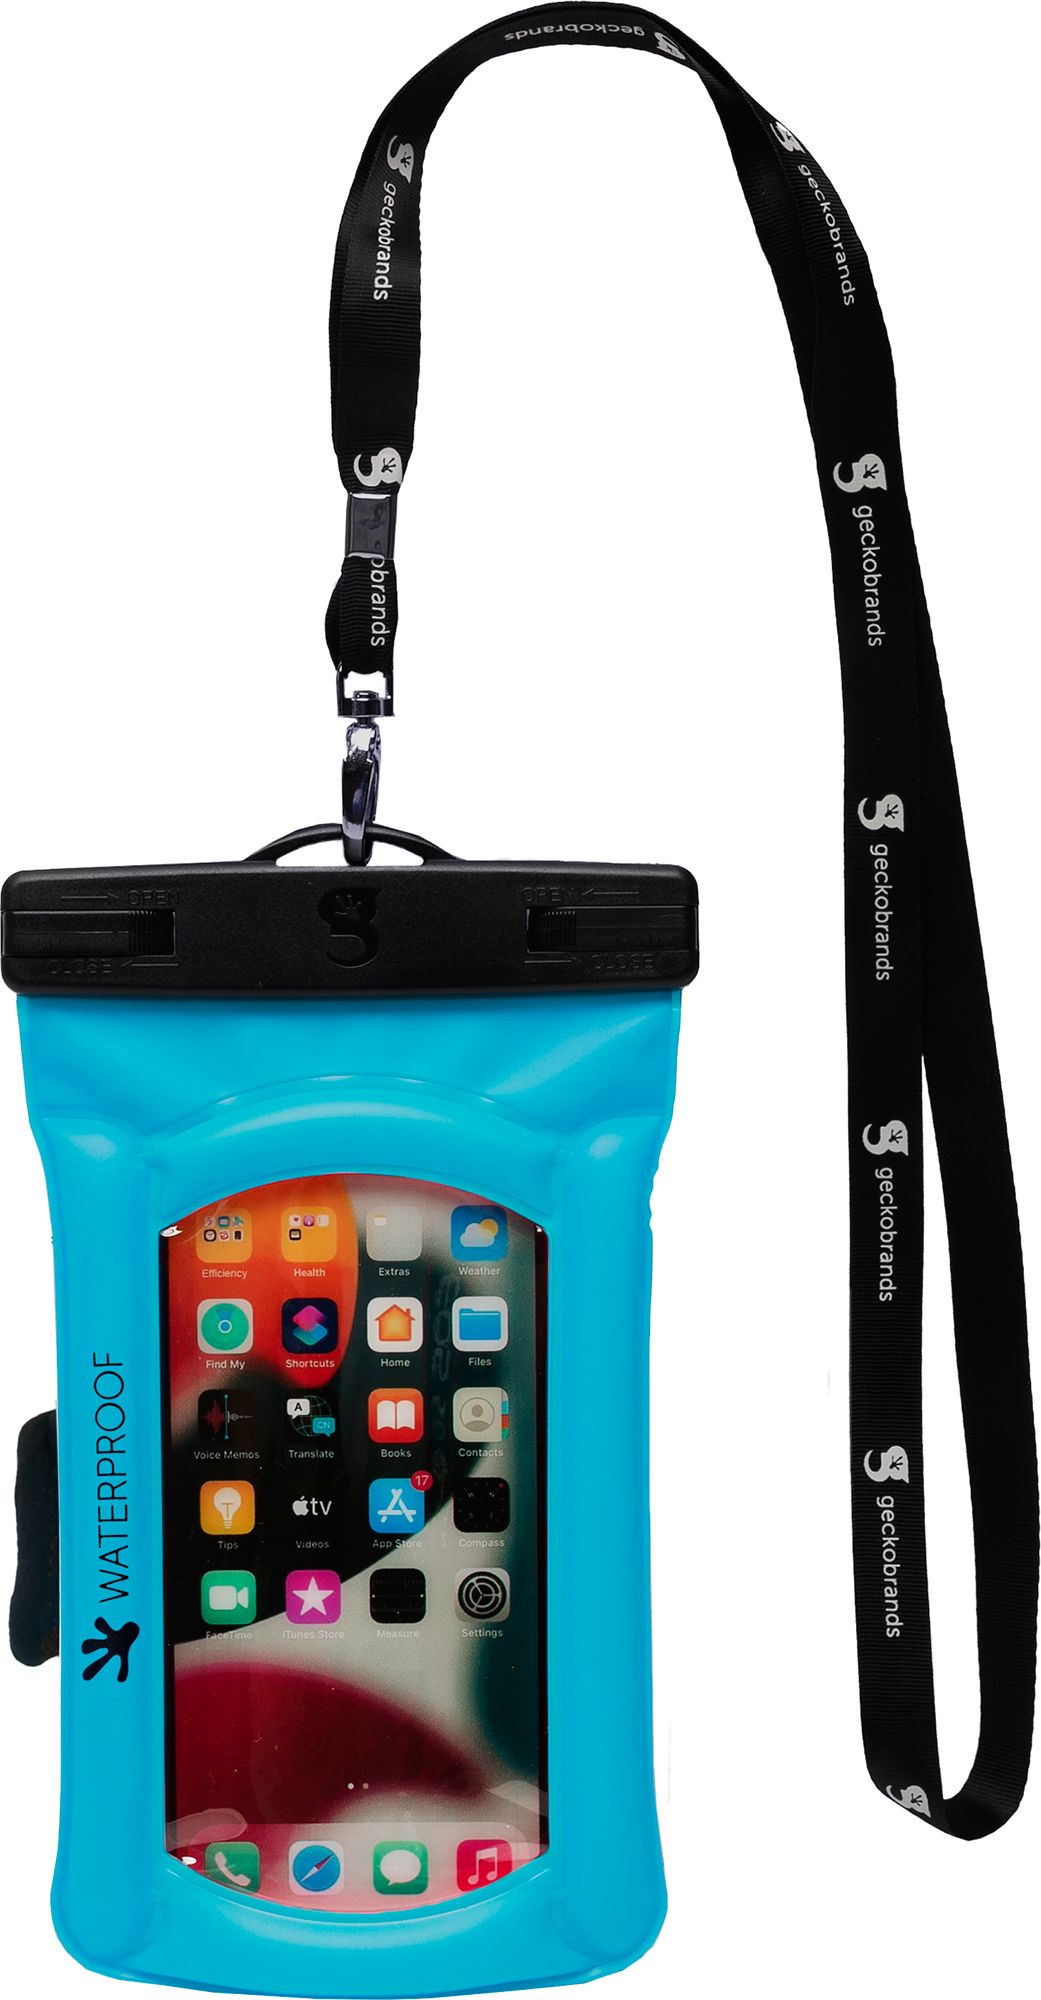 geckobrands Float Phone Dry Bag with Arm Band